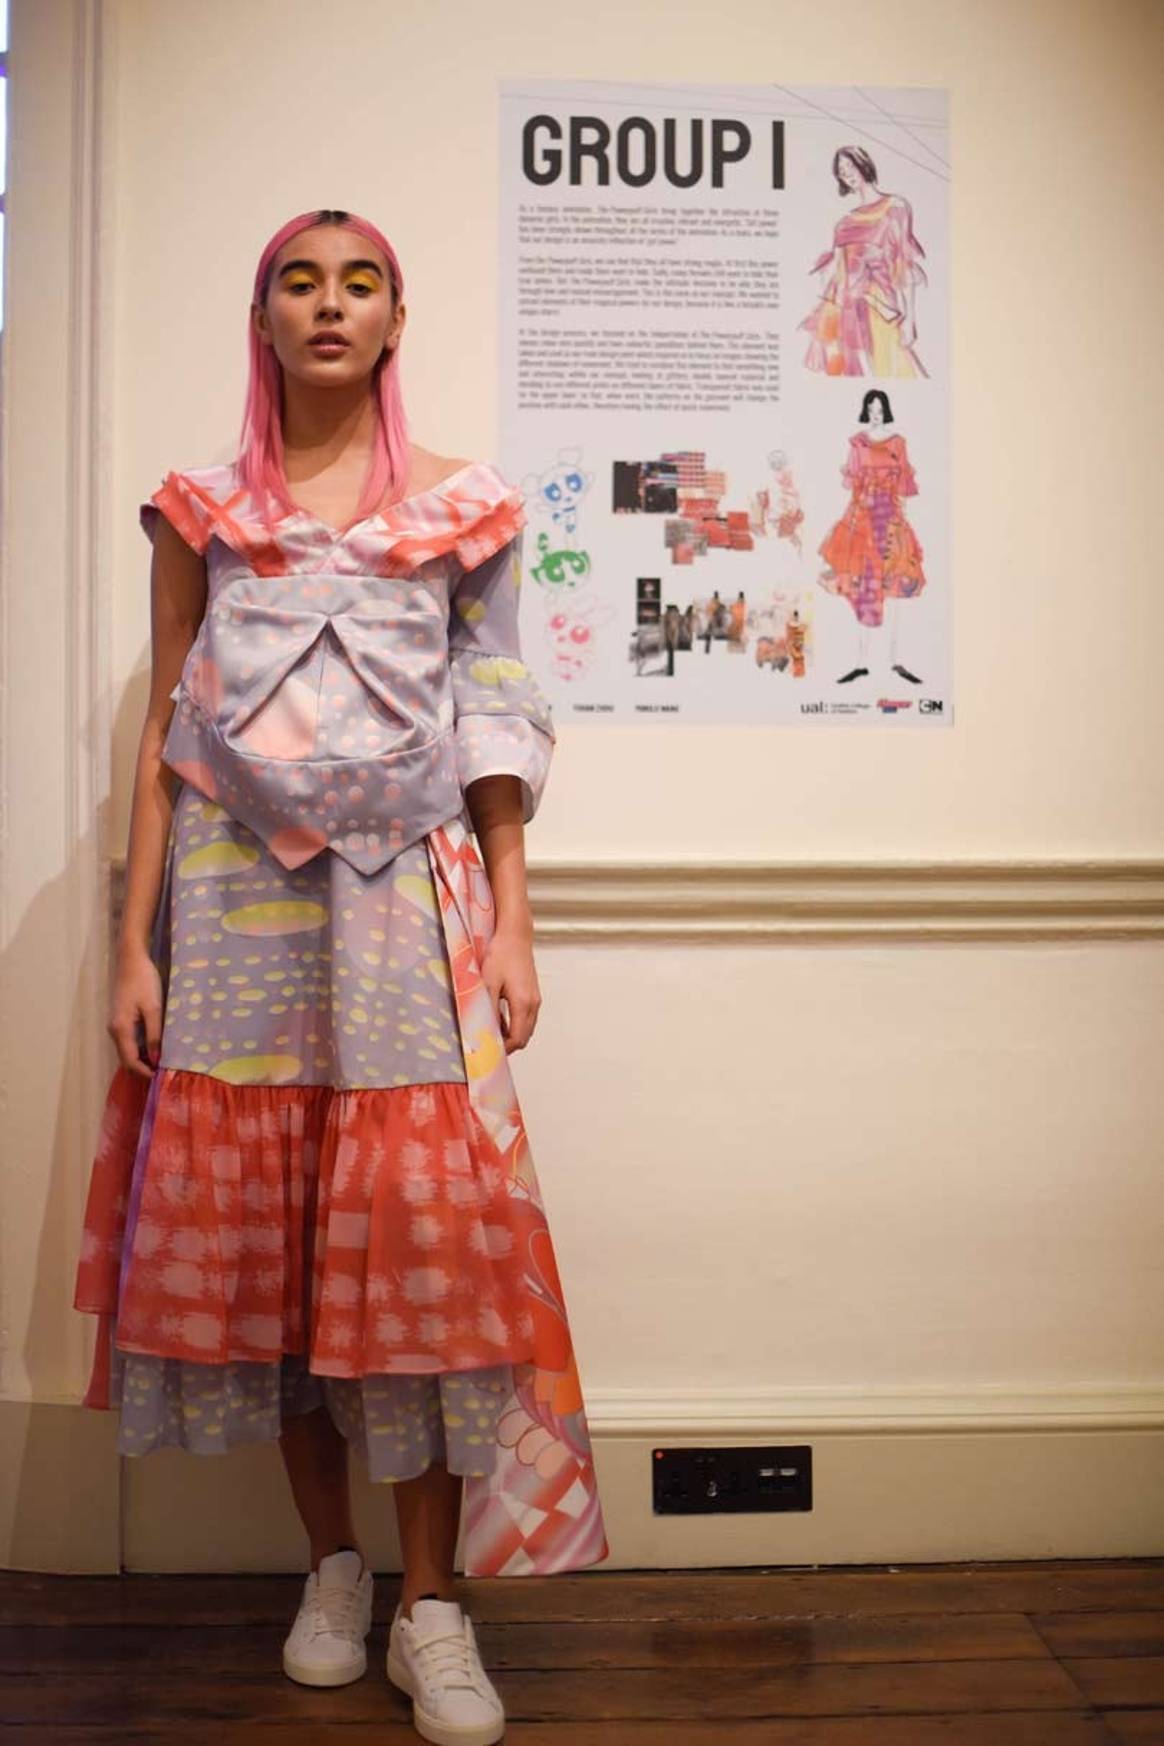 In pictures: London College of Fashion partners with Cartoon Network for student project